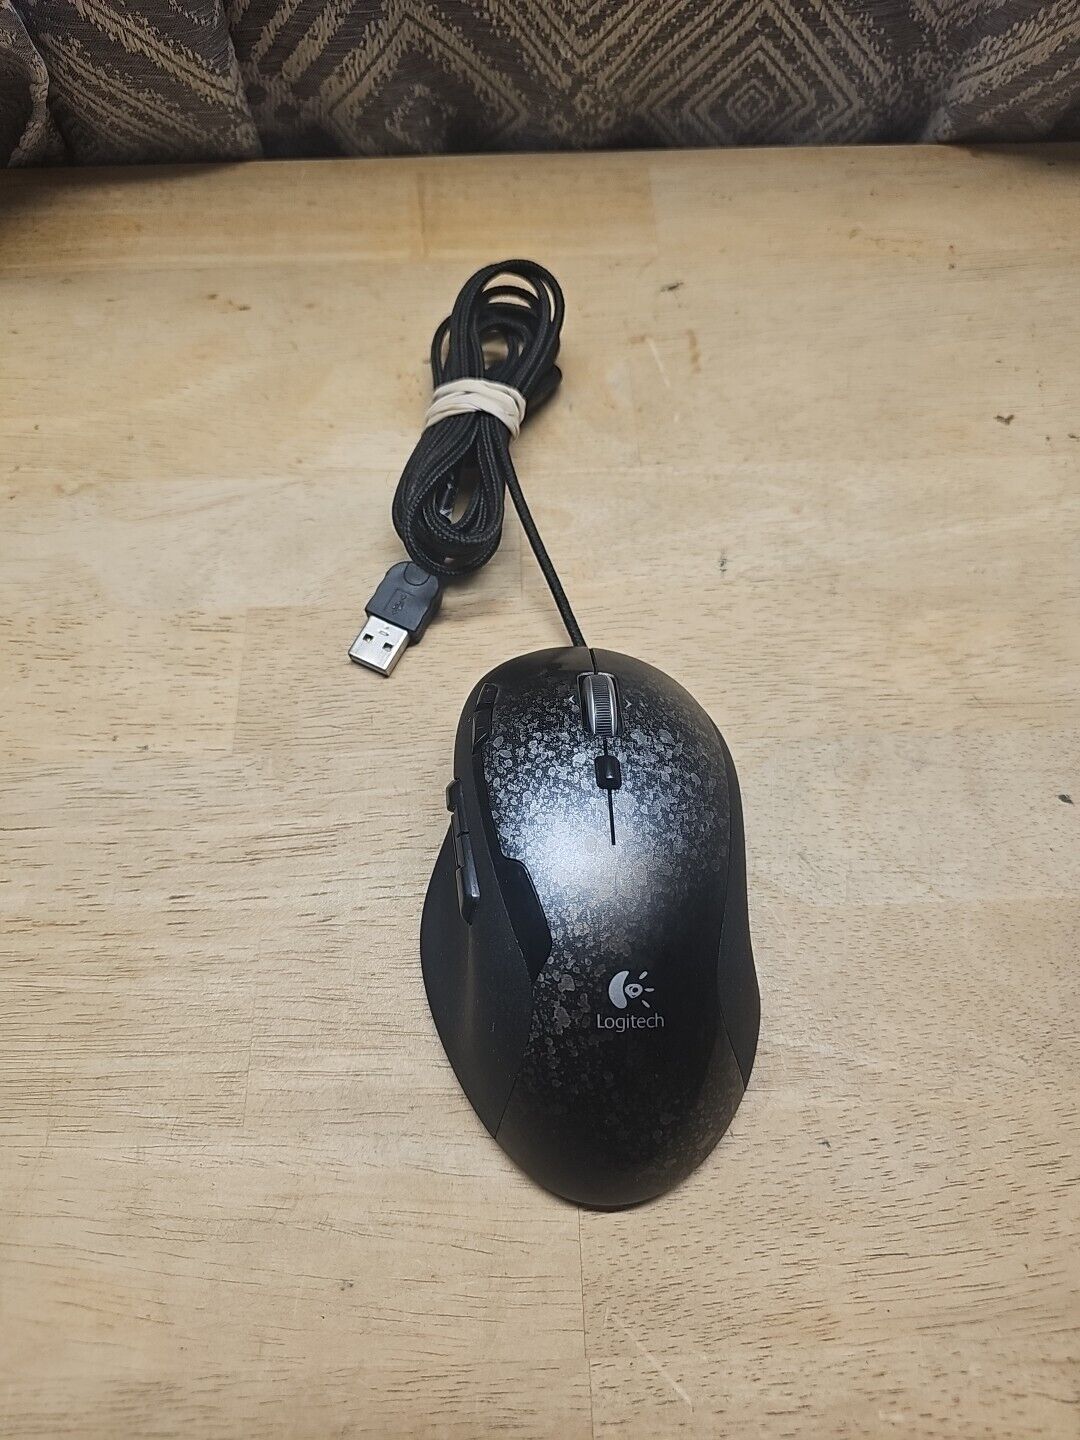 Logitech G500 USB Wired Gaming Mouse Used Black Tested (AB3)